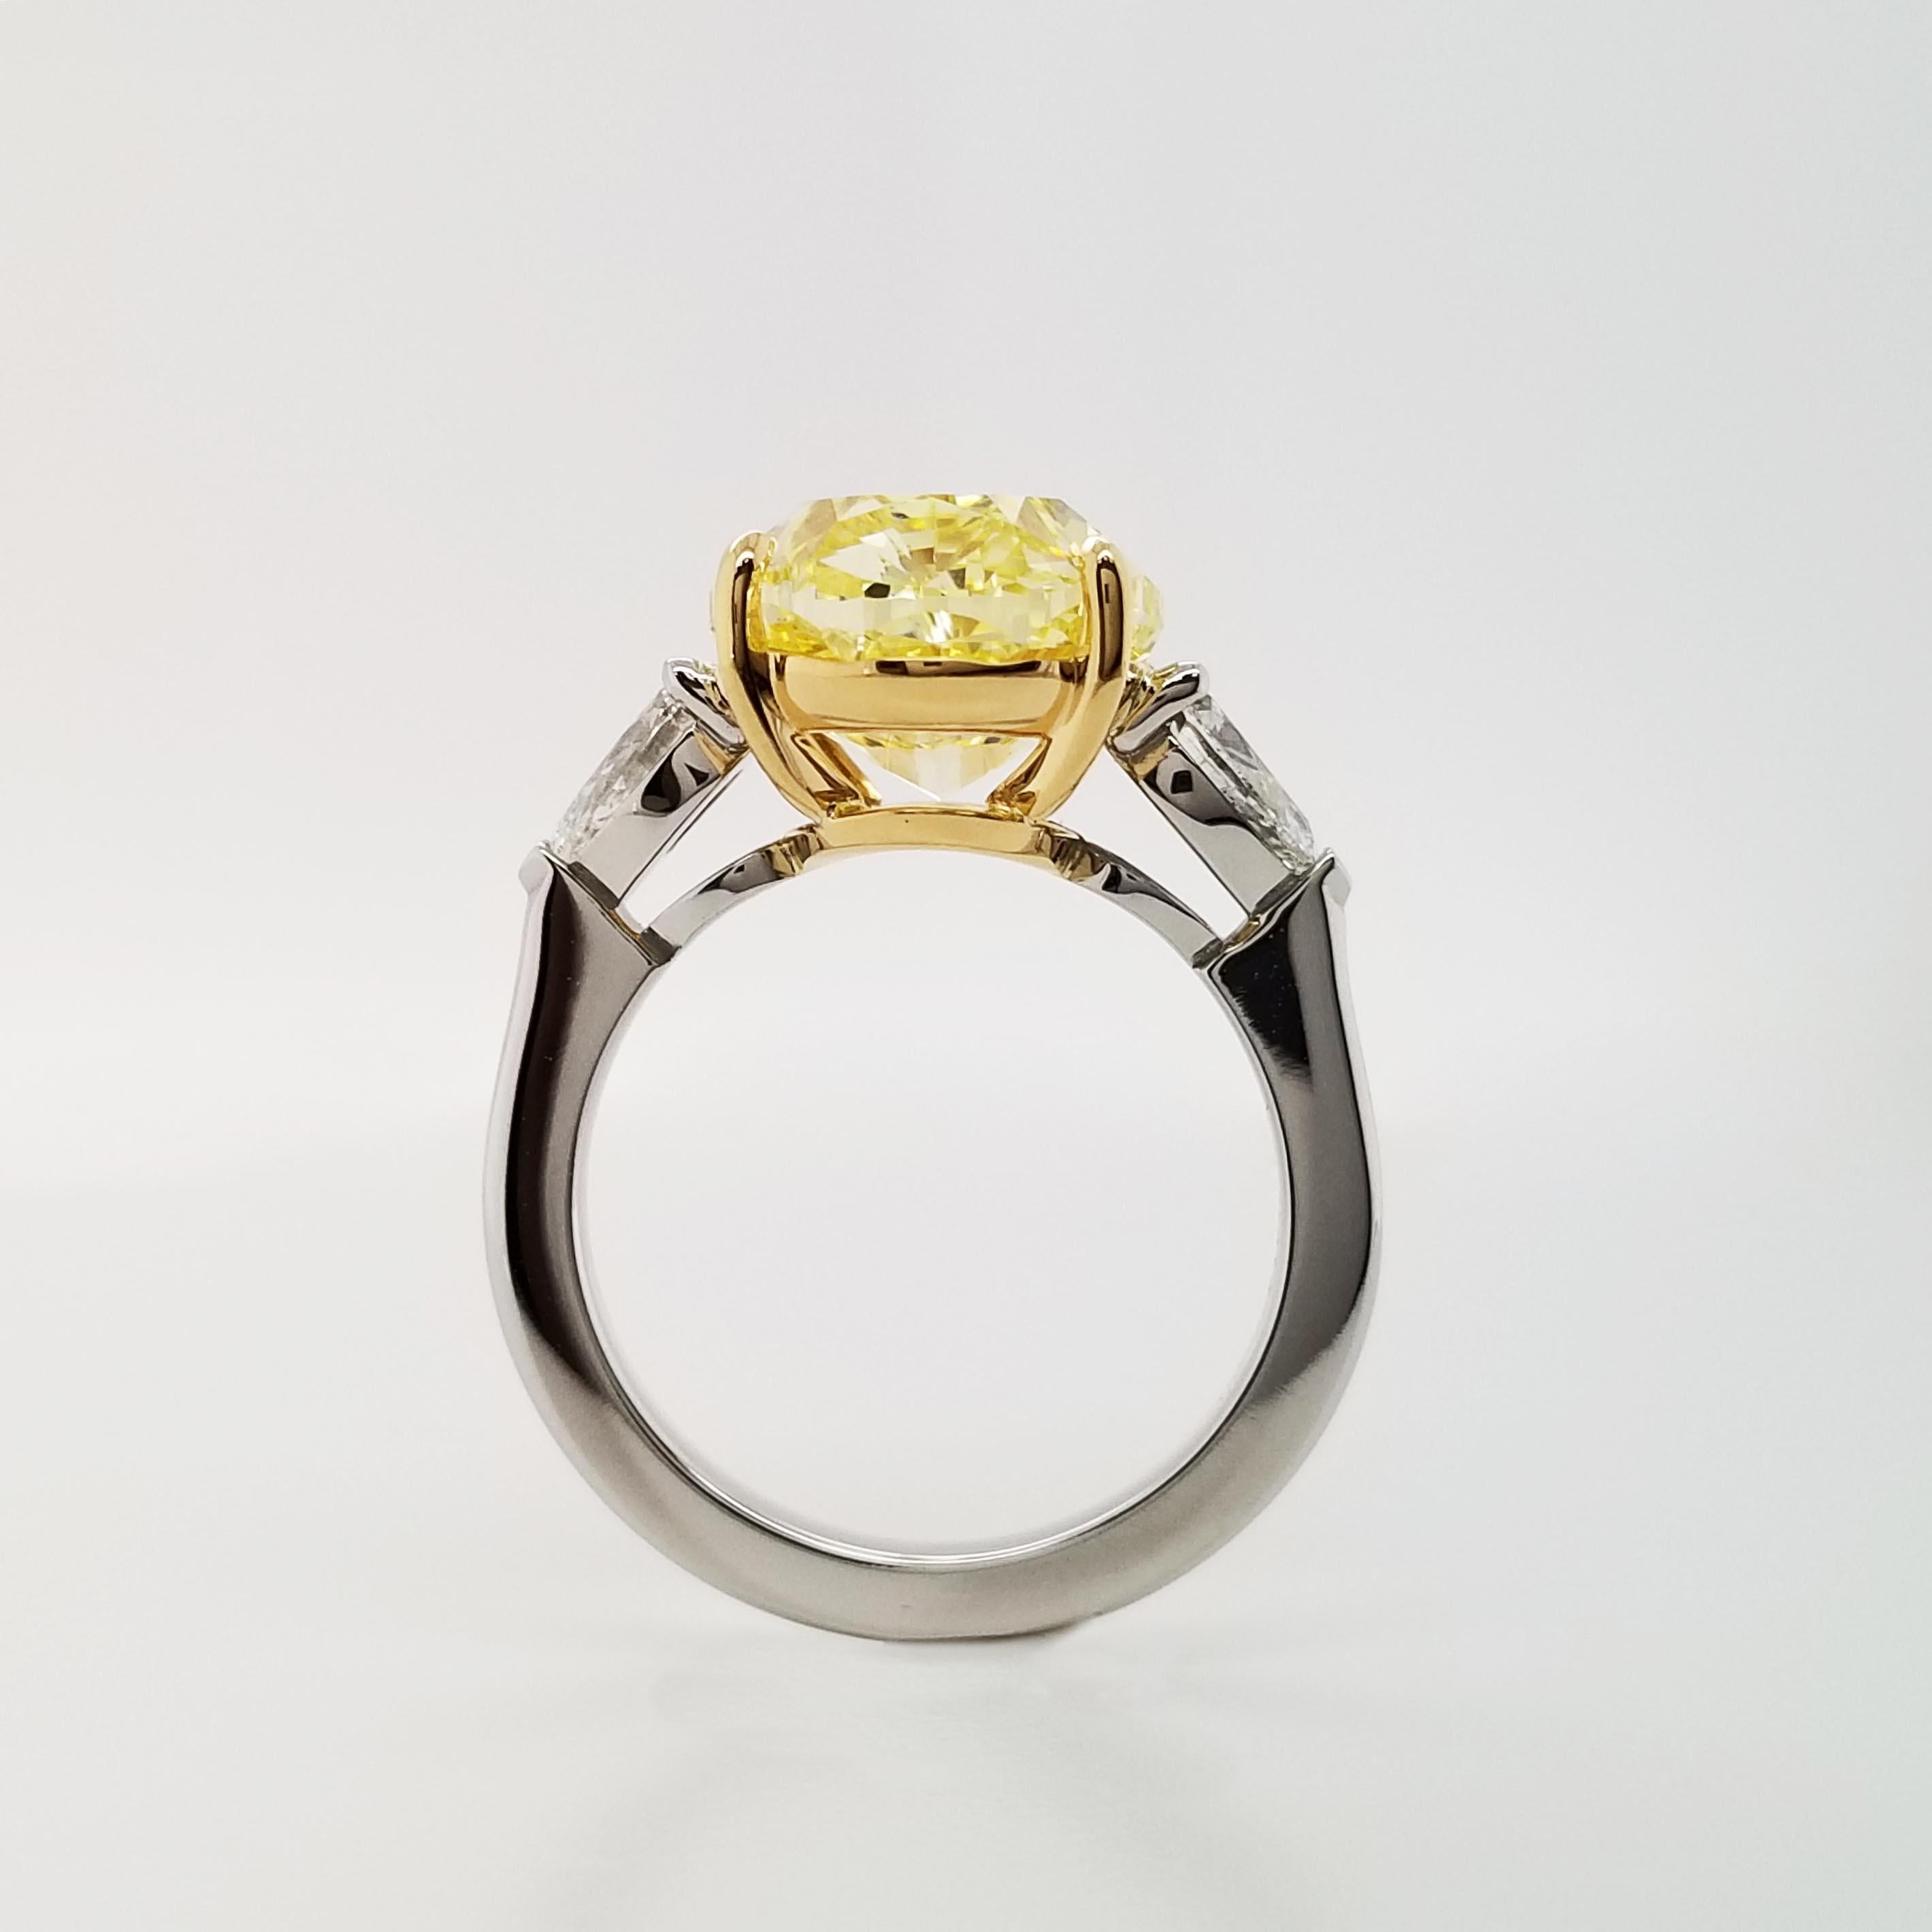 Contemporary Scarselli 8 Carat Fancy Intense Yellow Diamond GIA in a Platinum Engagement Ring